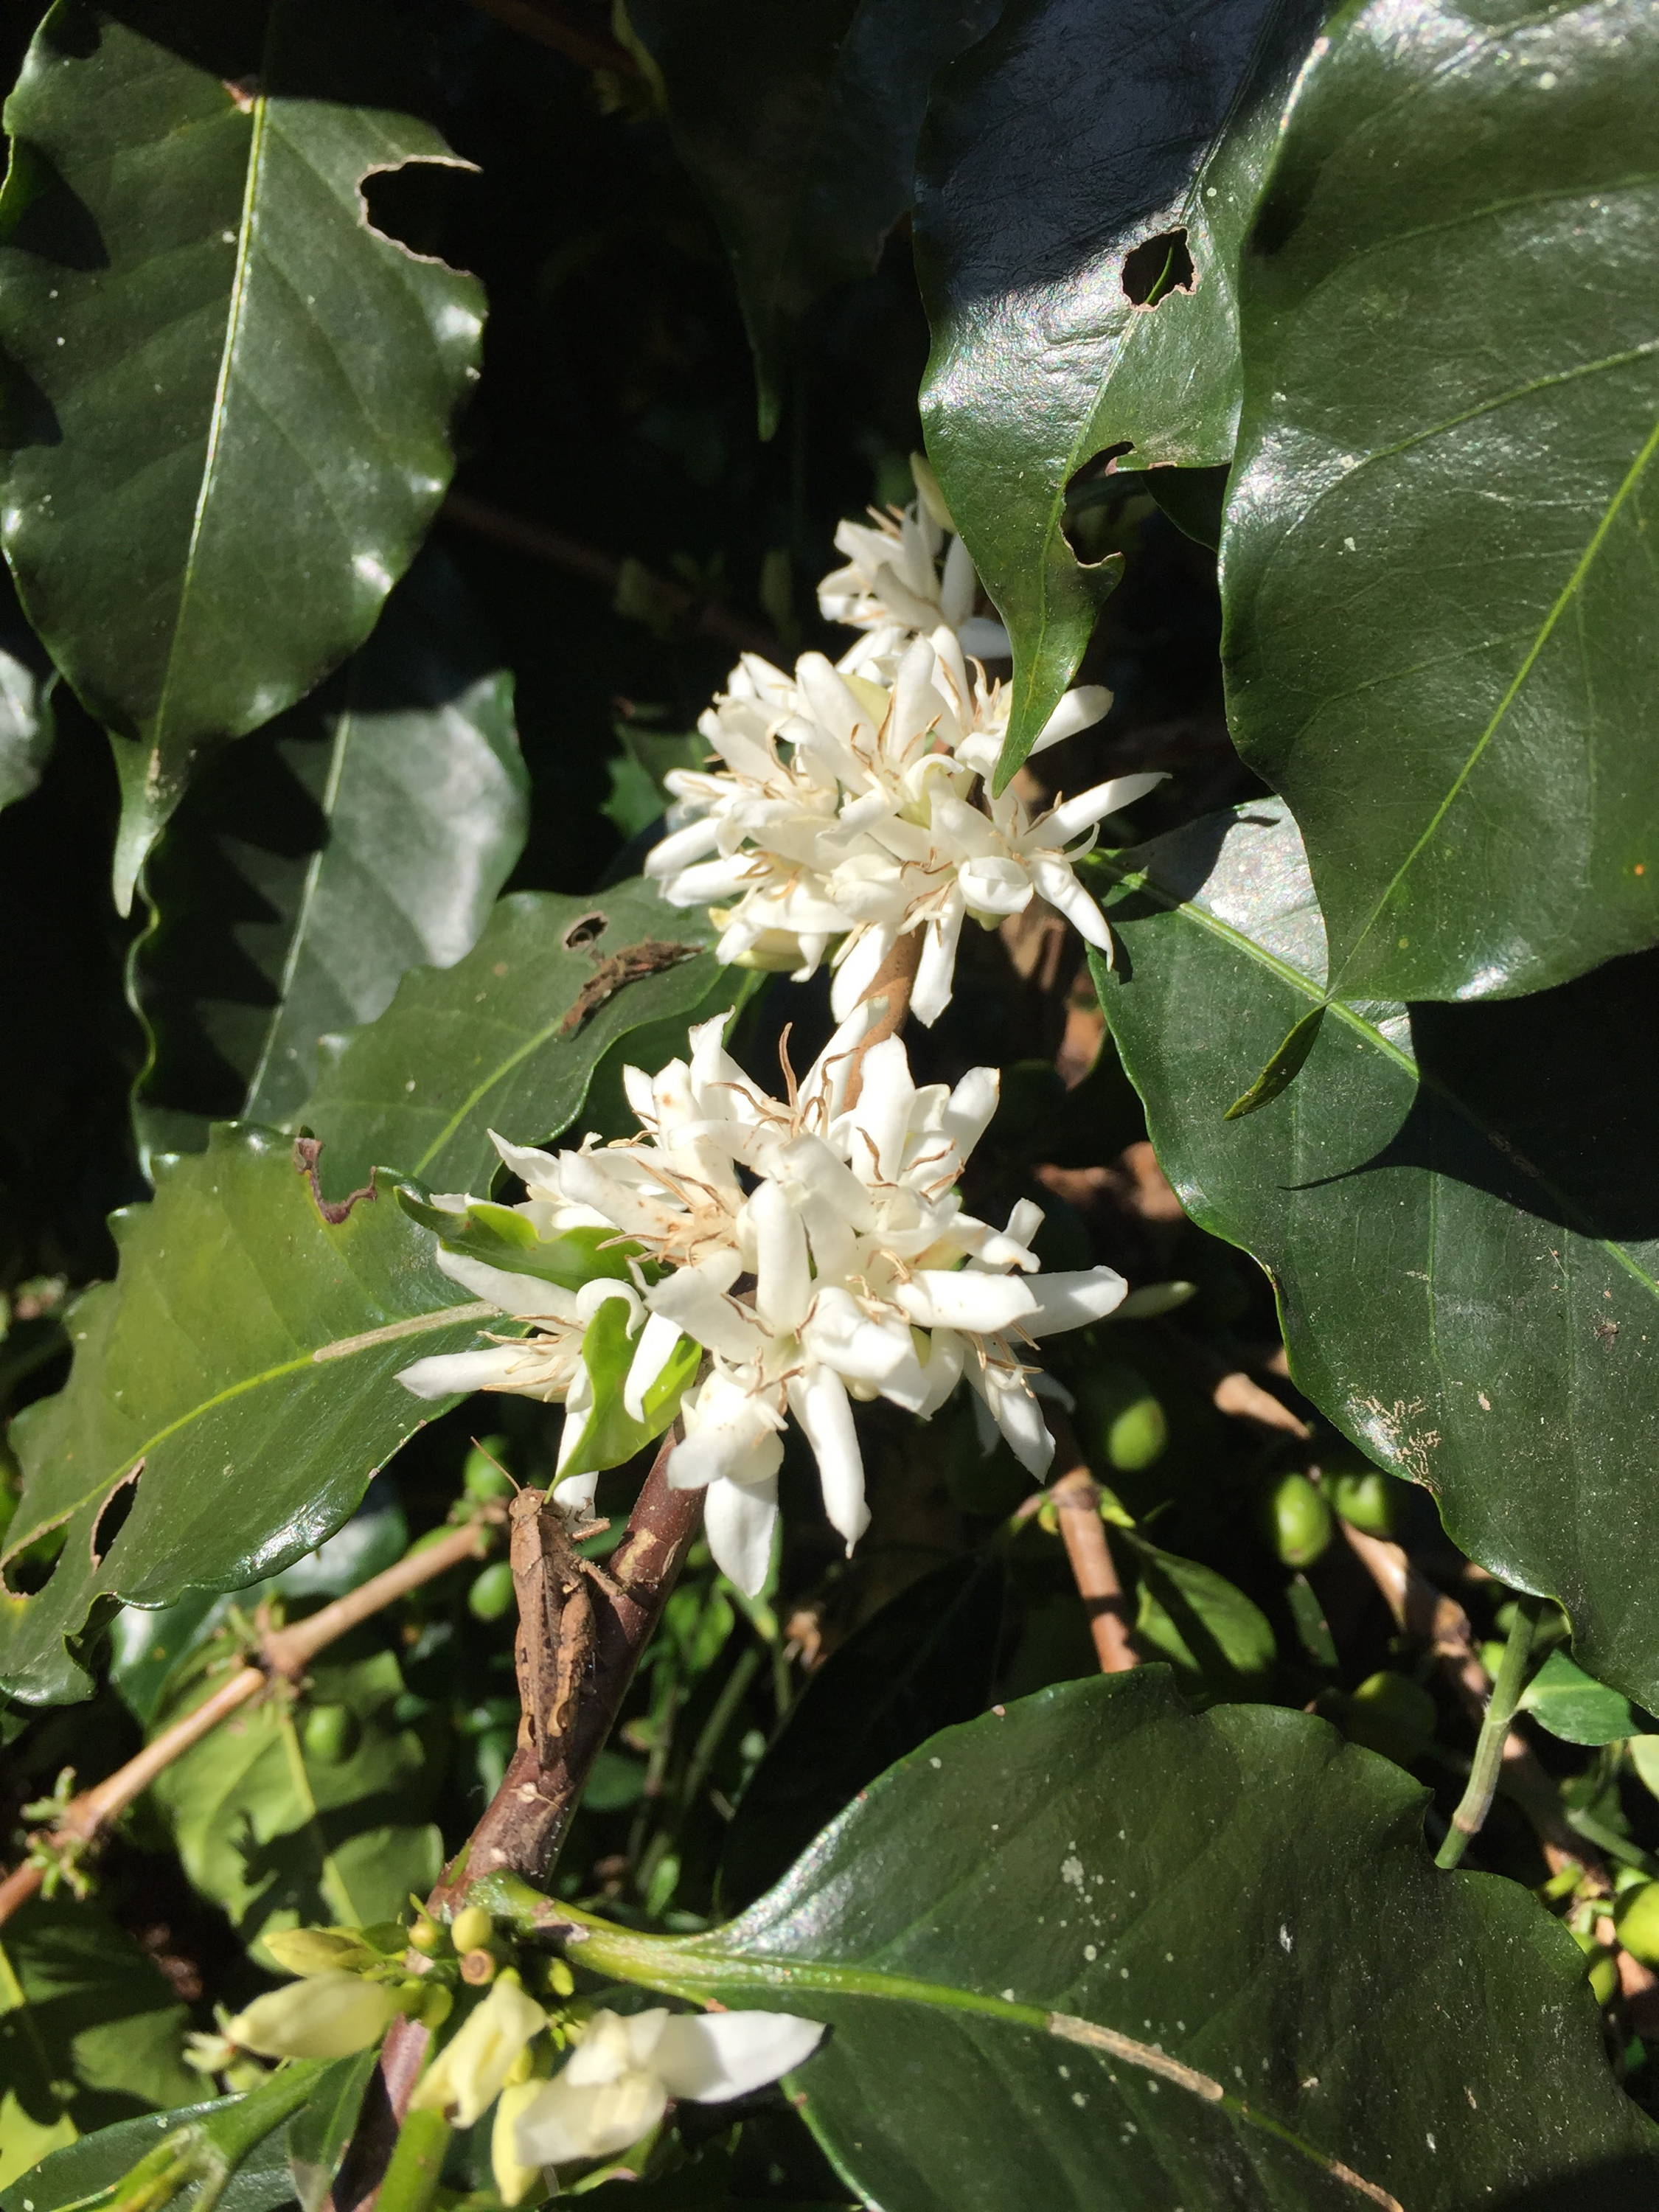 A coffee tree will often blossom while producing fruit. You can see the new green fruits in the background, on other limbs of the tree that is flowering.